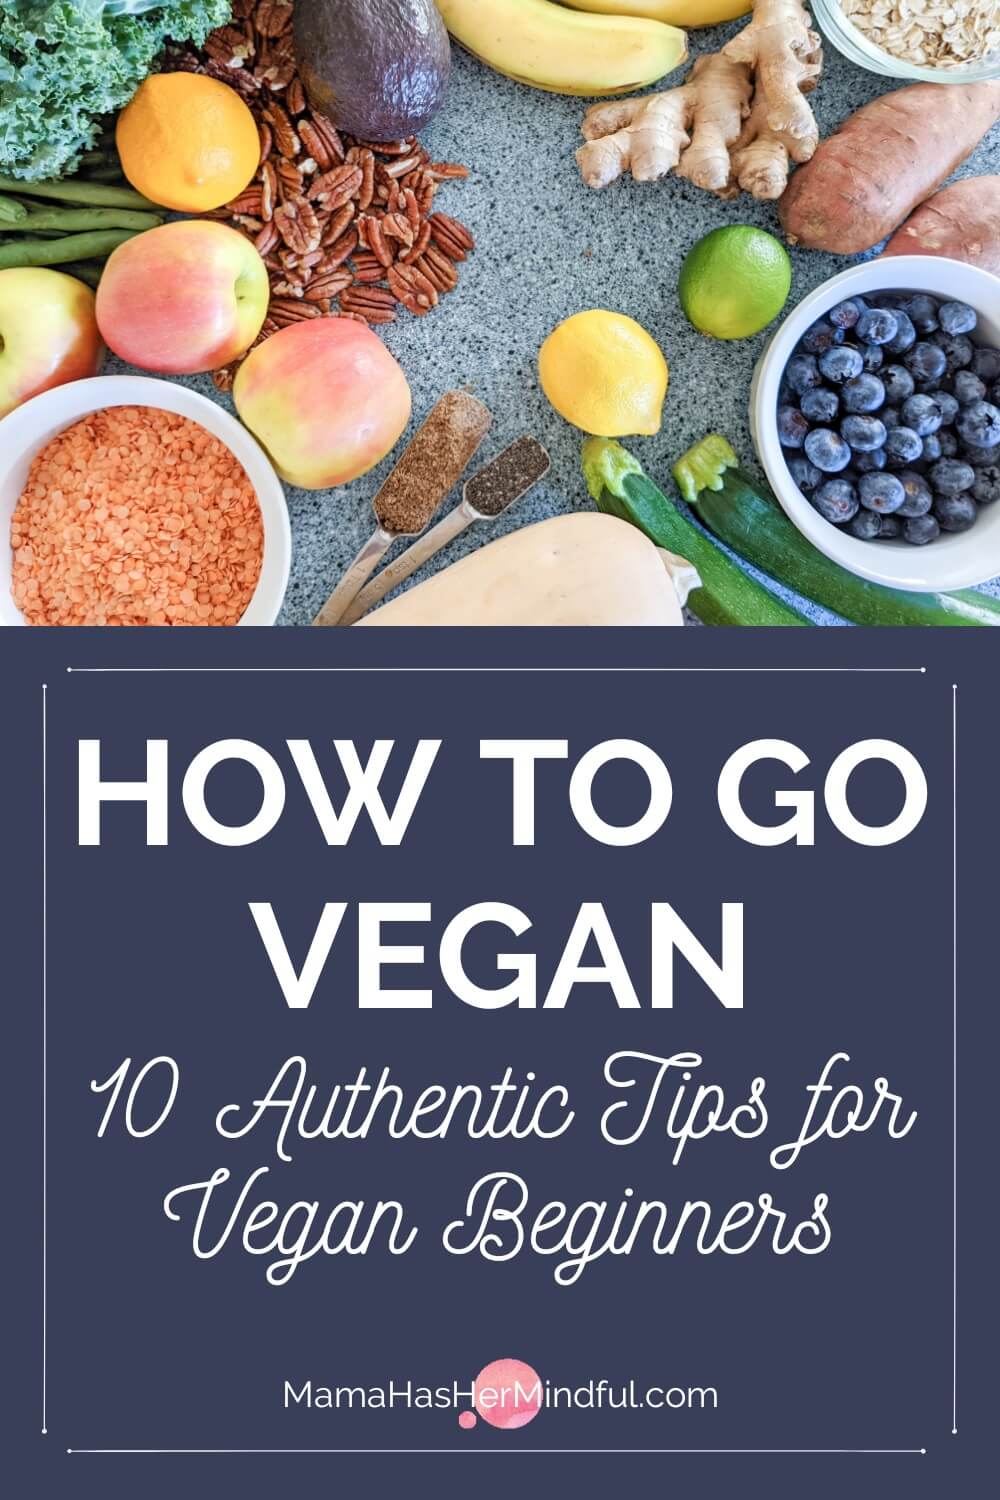 How to Go Vegan in 2022: 10 Tips for Vegan Beginners (and Families)